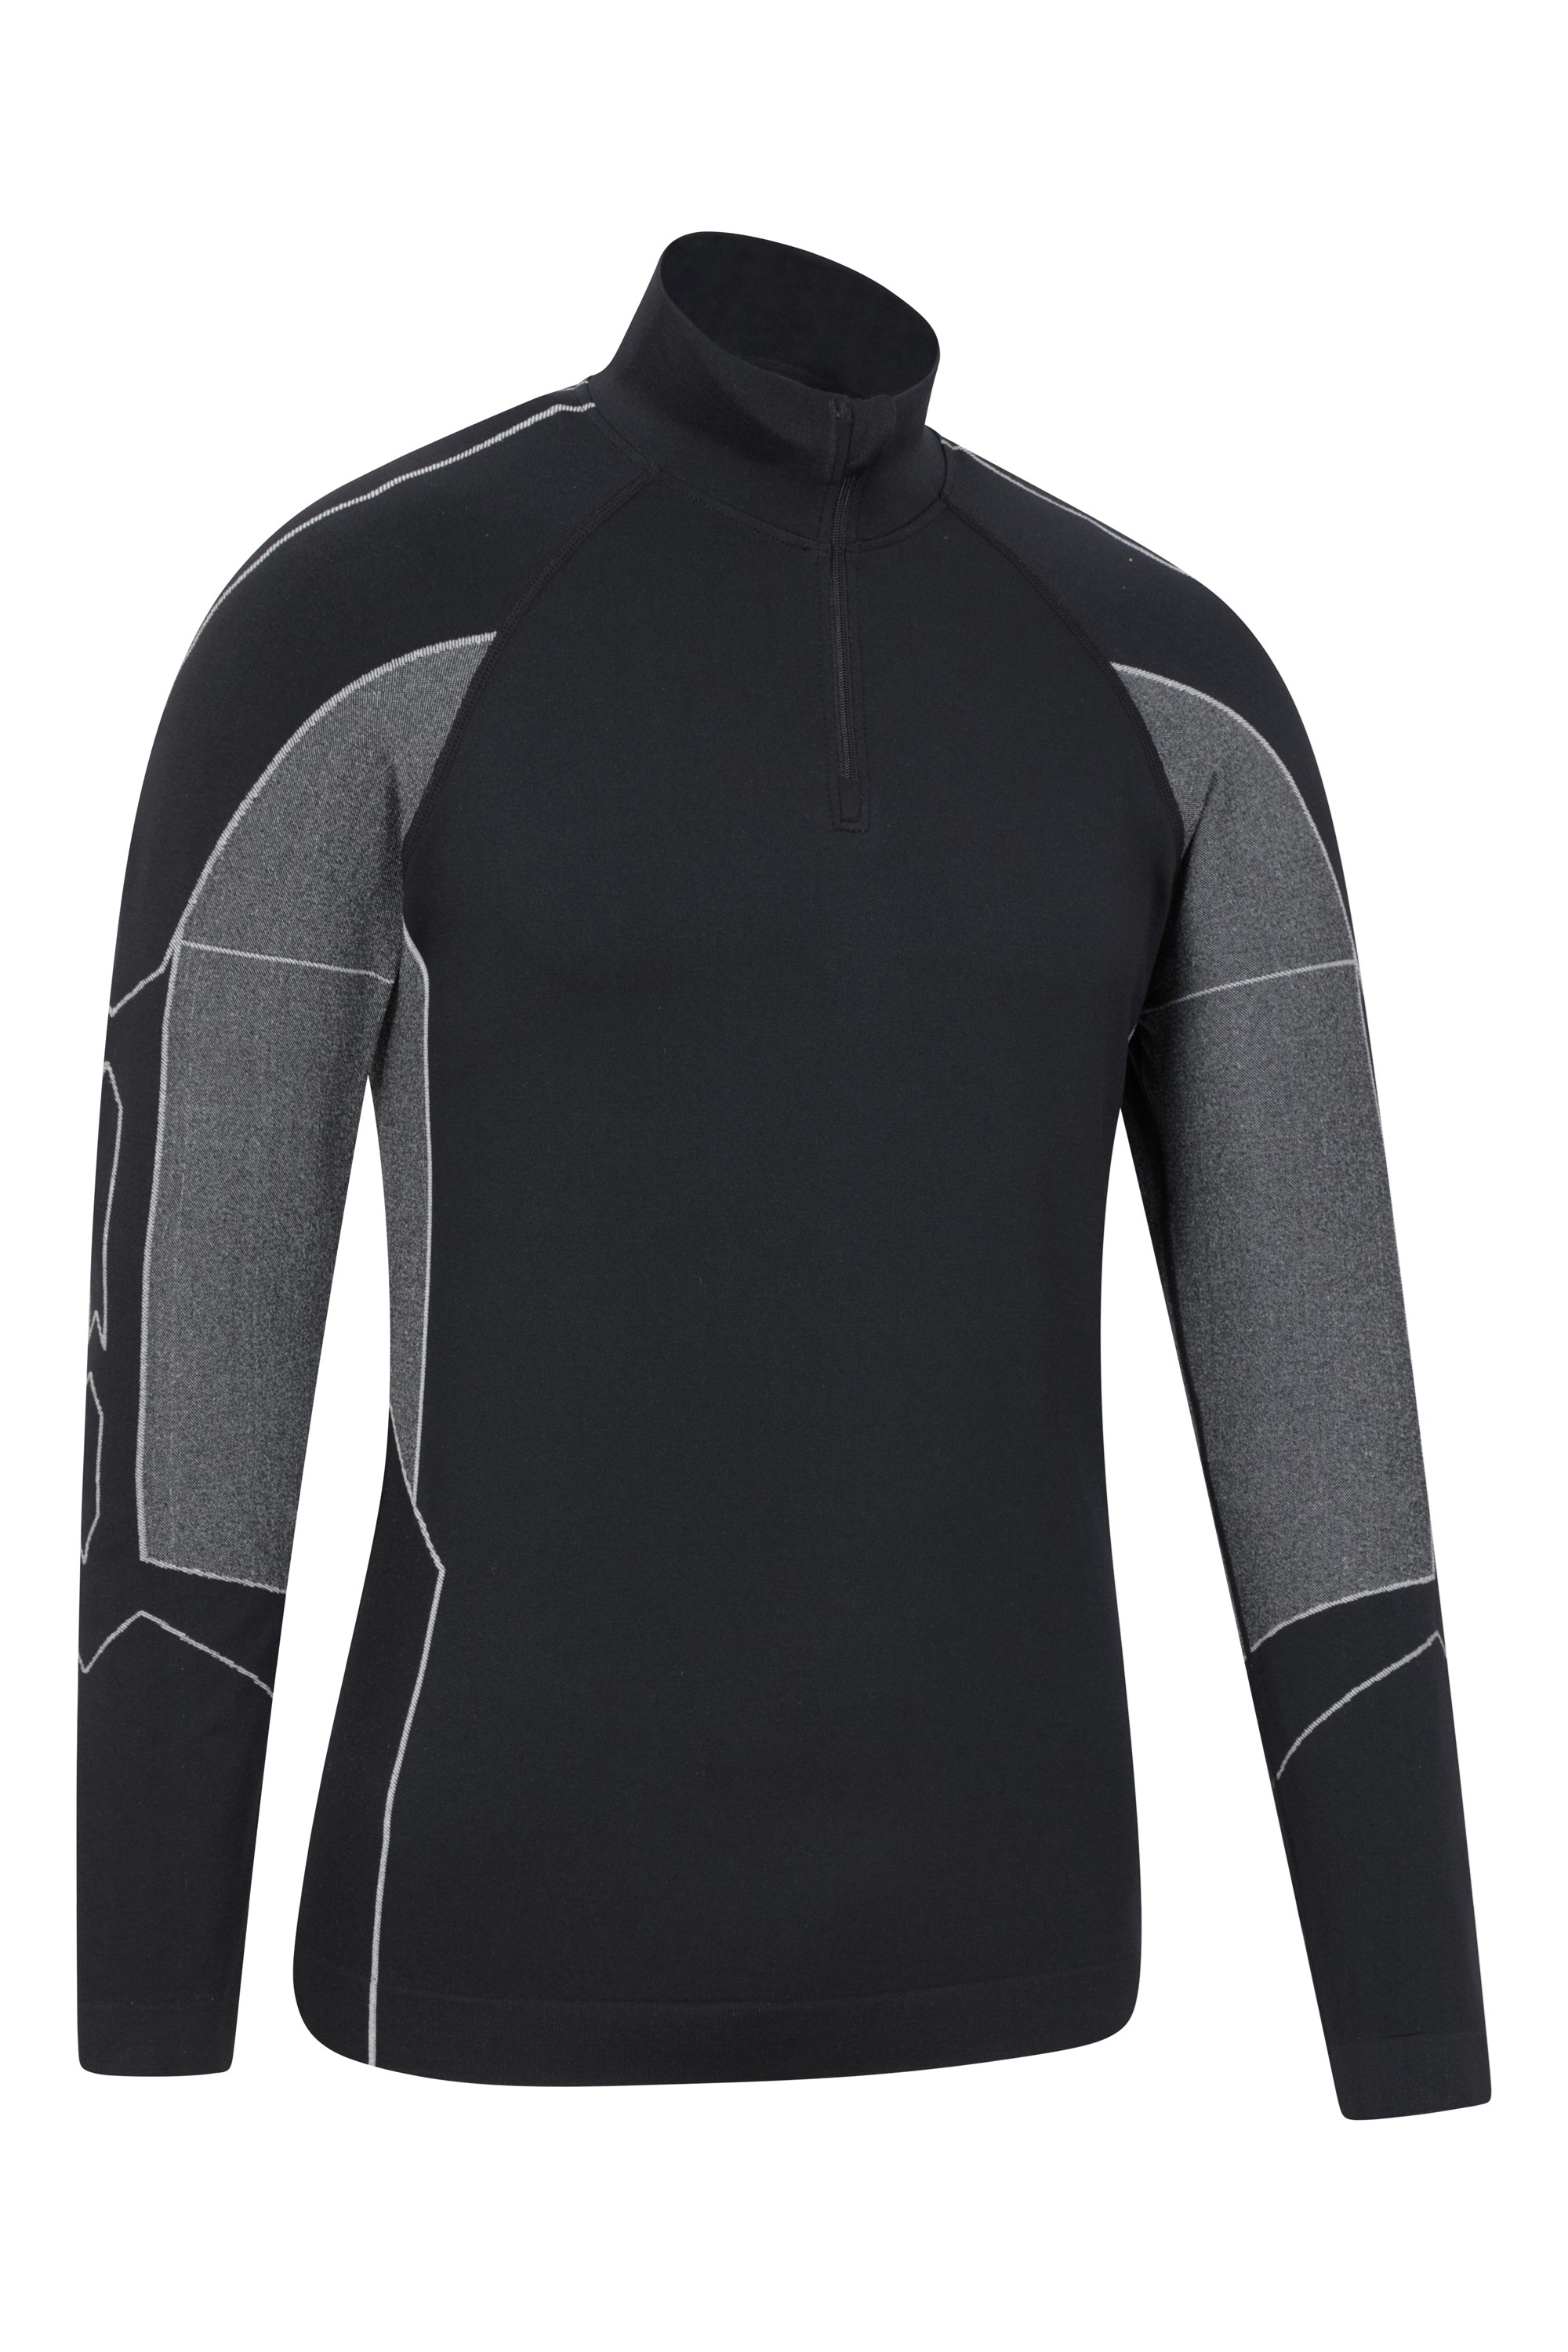 Quiver II Mens Seamless Base Layer Top